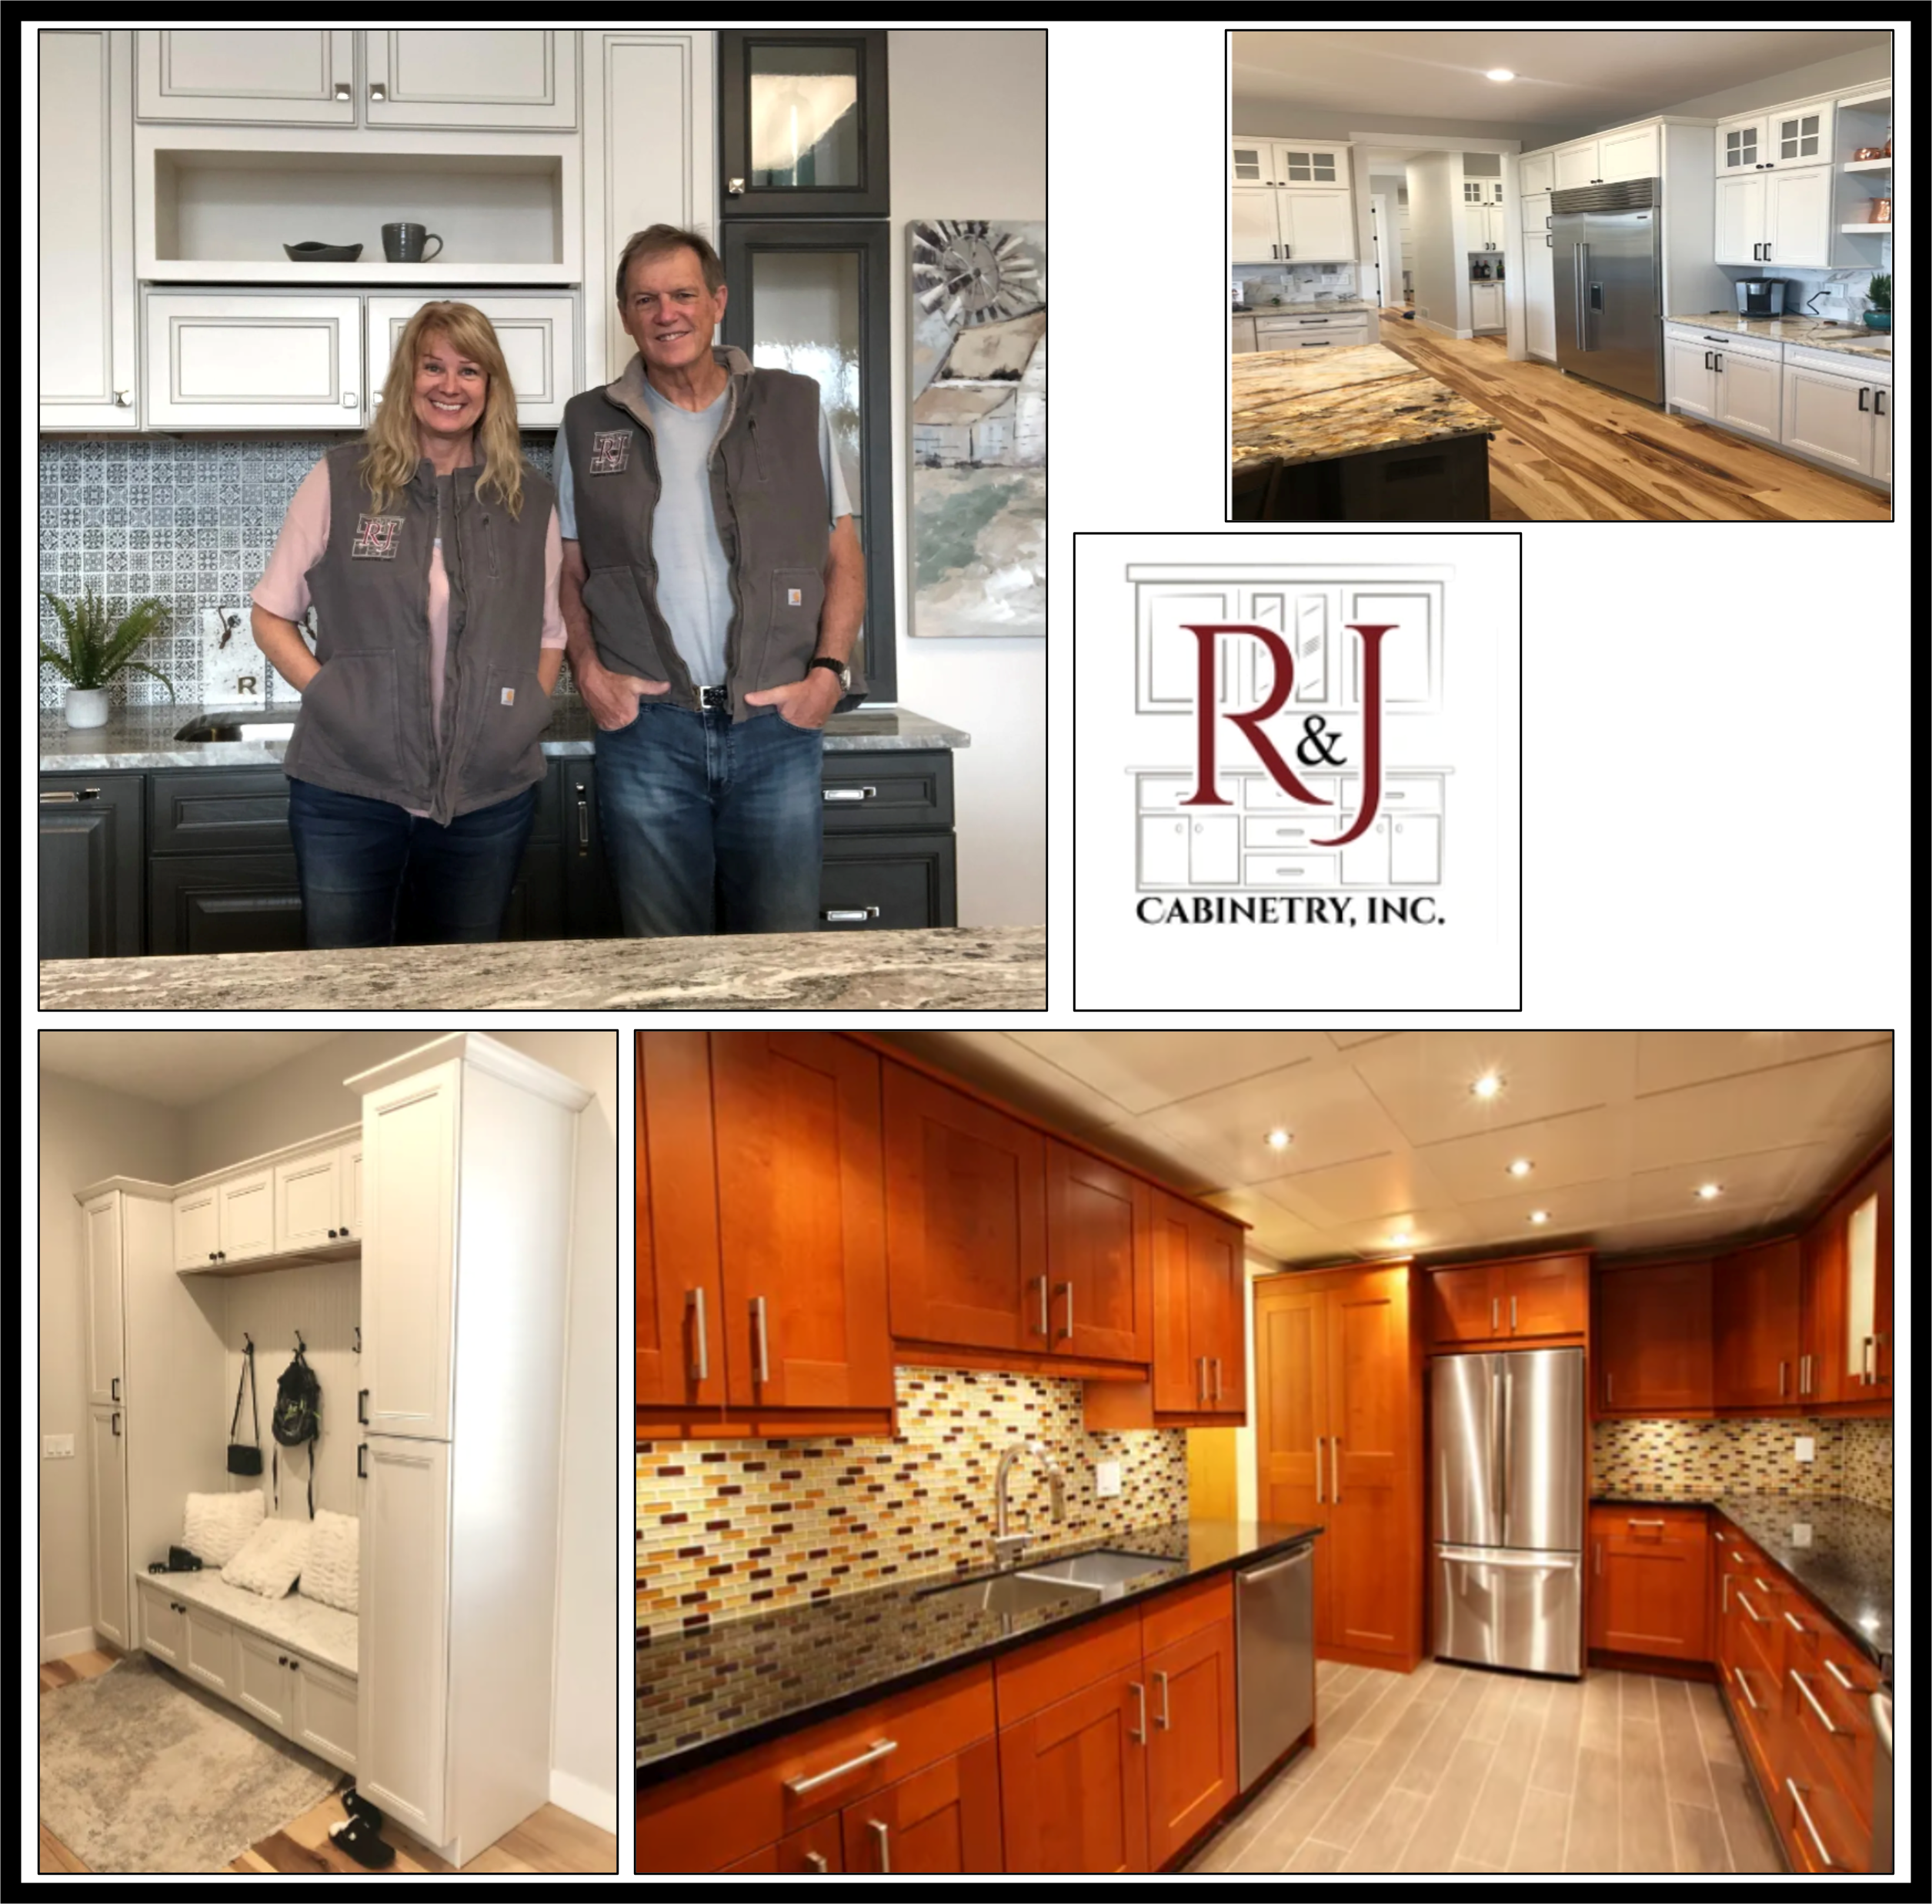 R&J Cabinetry